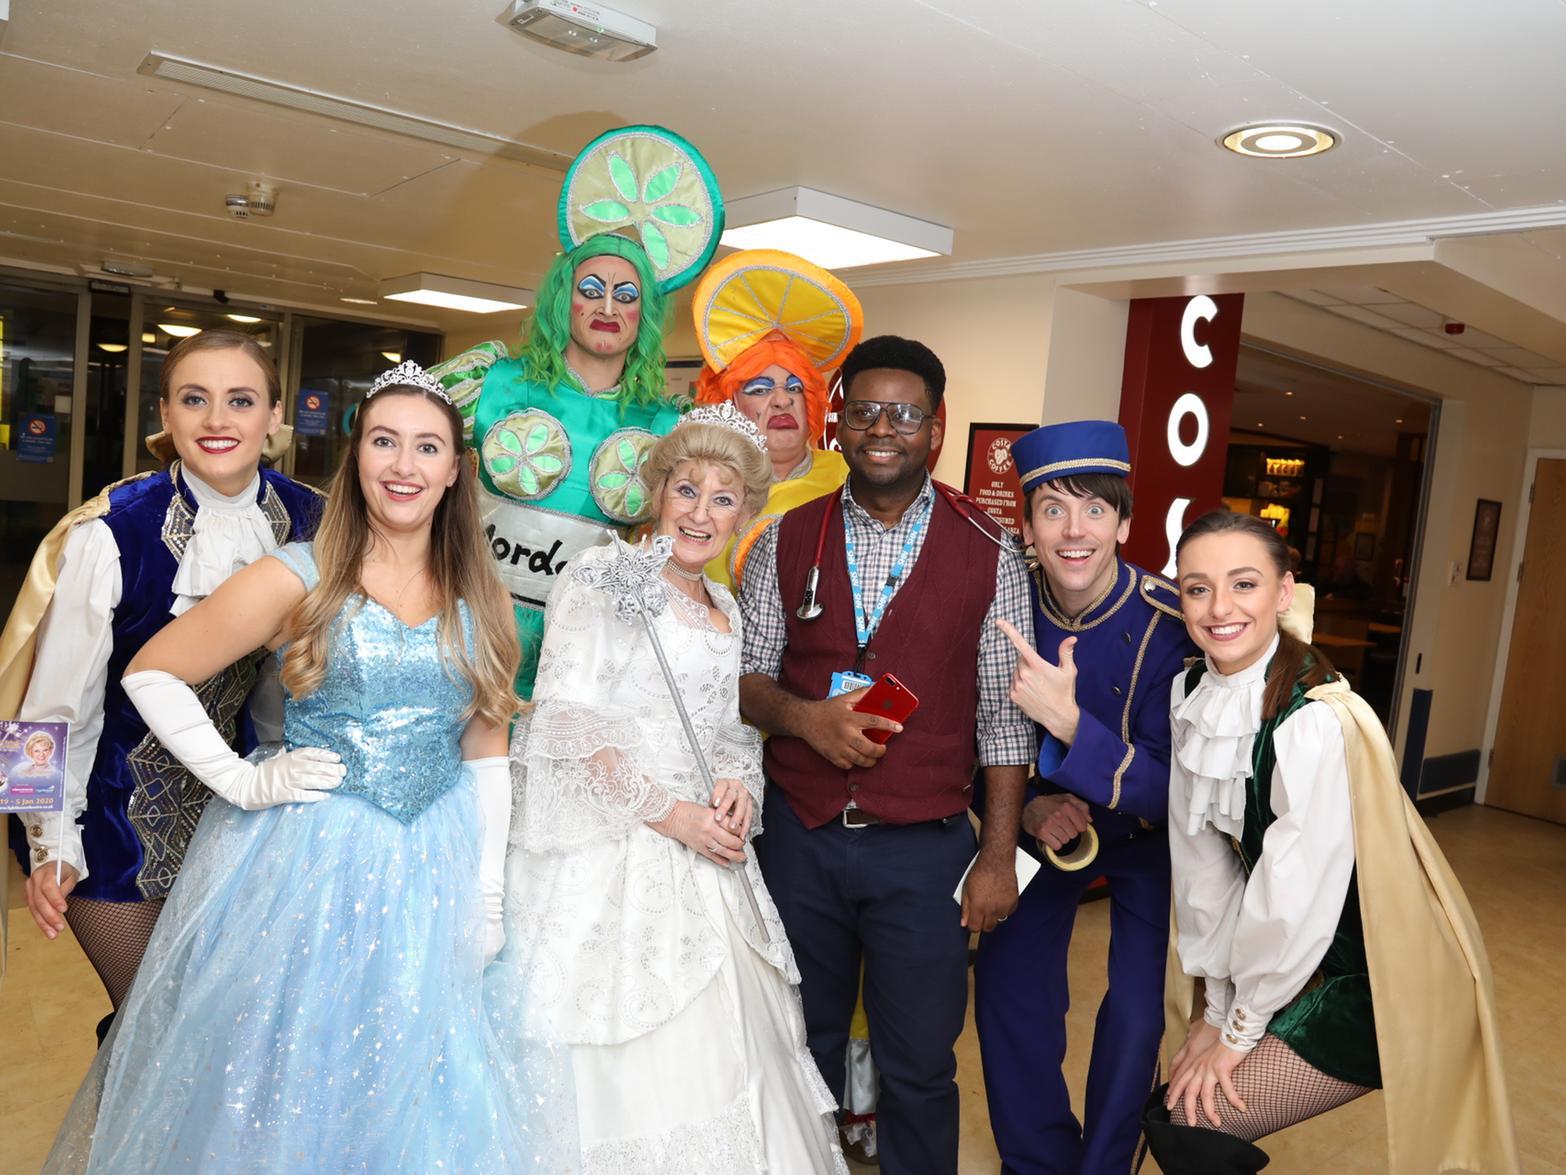 It wasn't just the children who were pleased to see the panto cast, Dr. James Akajioyi passed by in the corridor and stopped for a photo and a selfie.